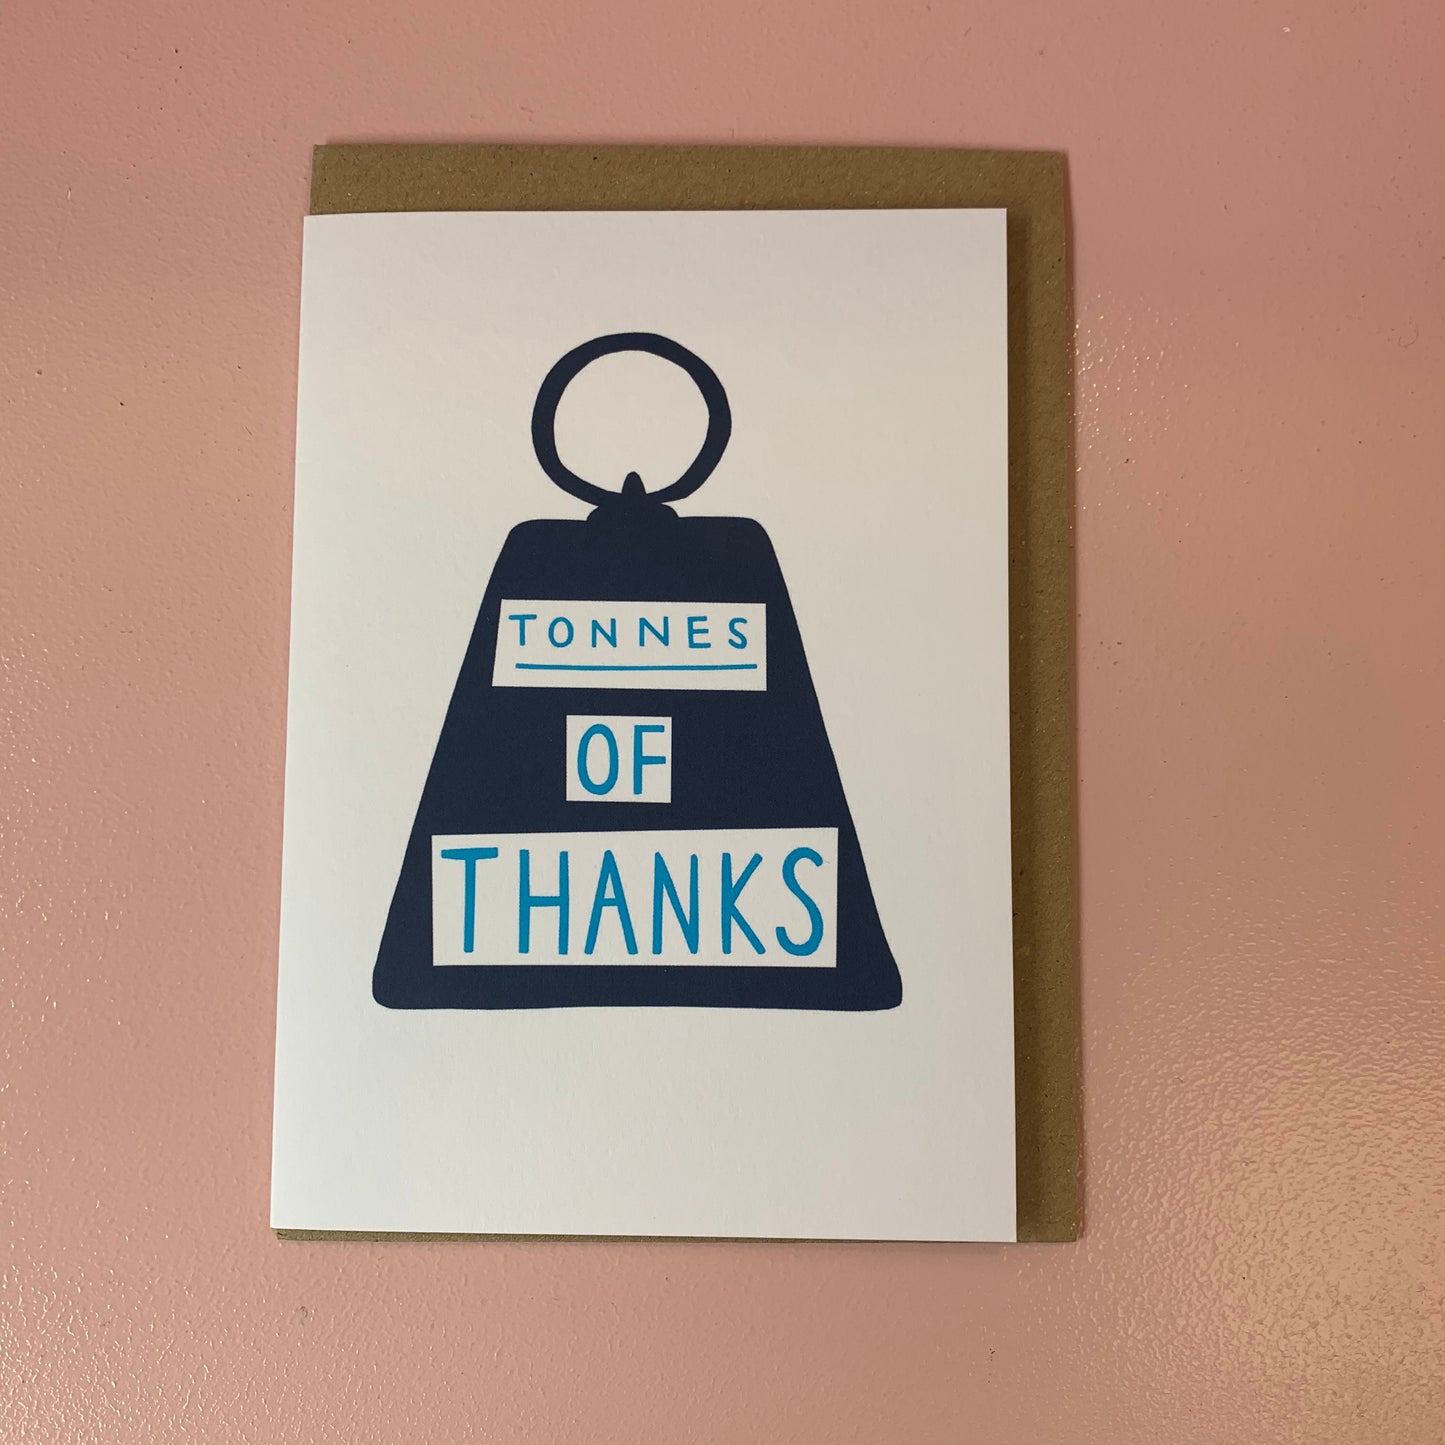 Tonnes Of Thanks Card